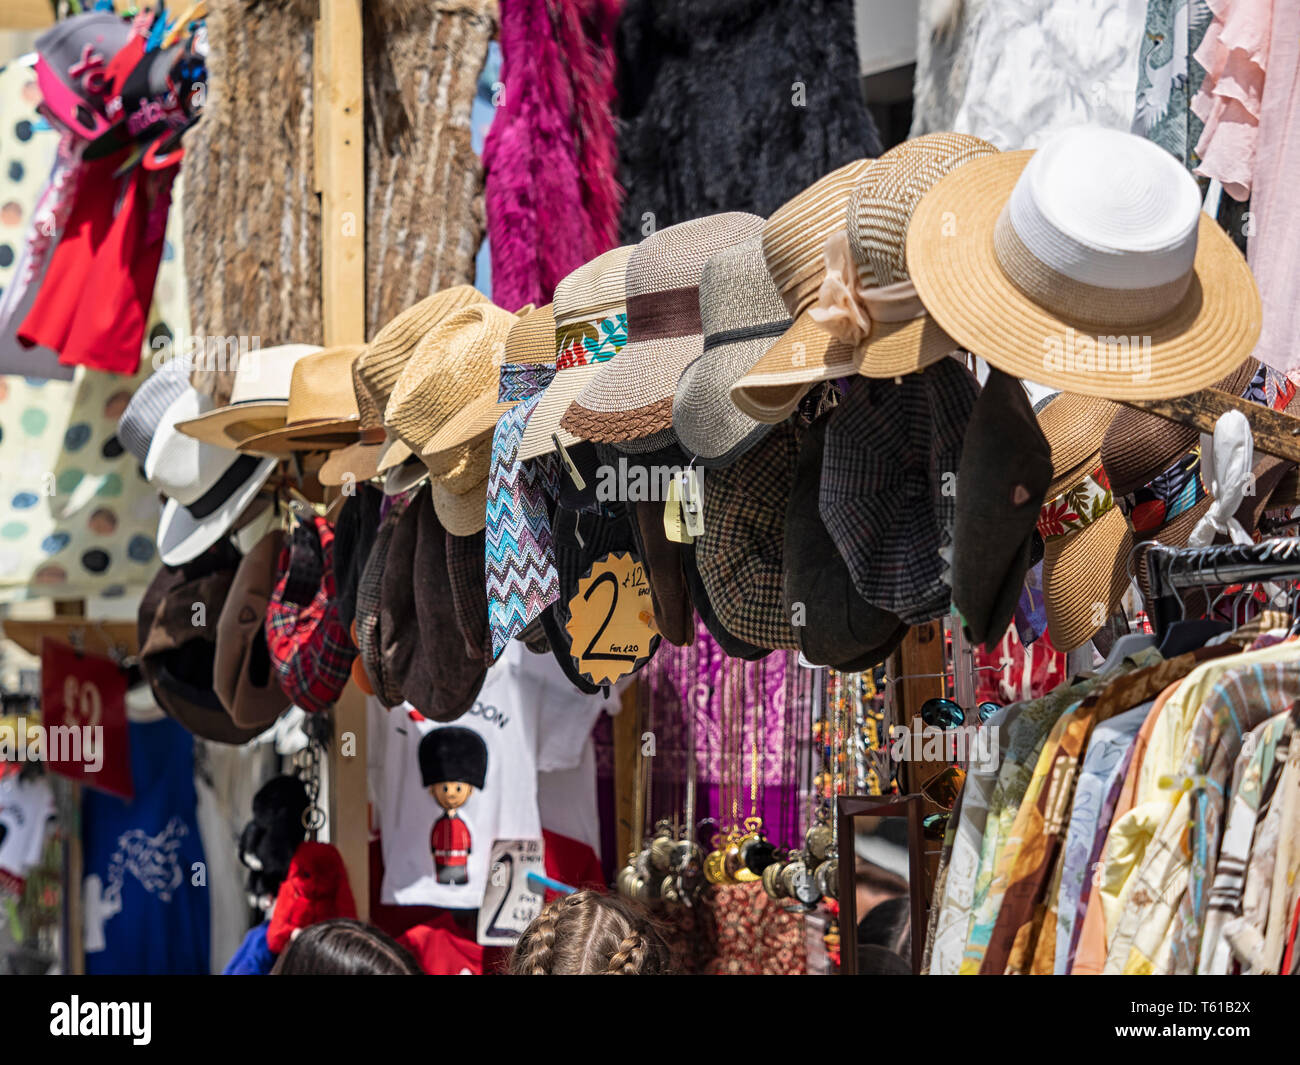 LONDON, UK - JUNE 14, 2018:  Hats and clothes for sale at Notting Hill Street Market Stock Photo